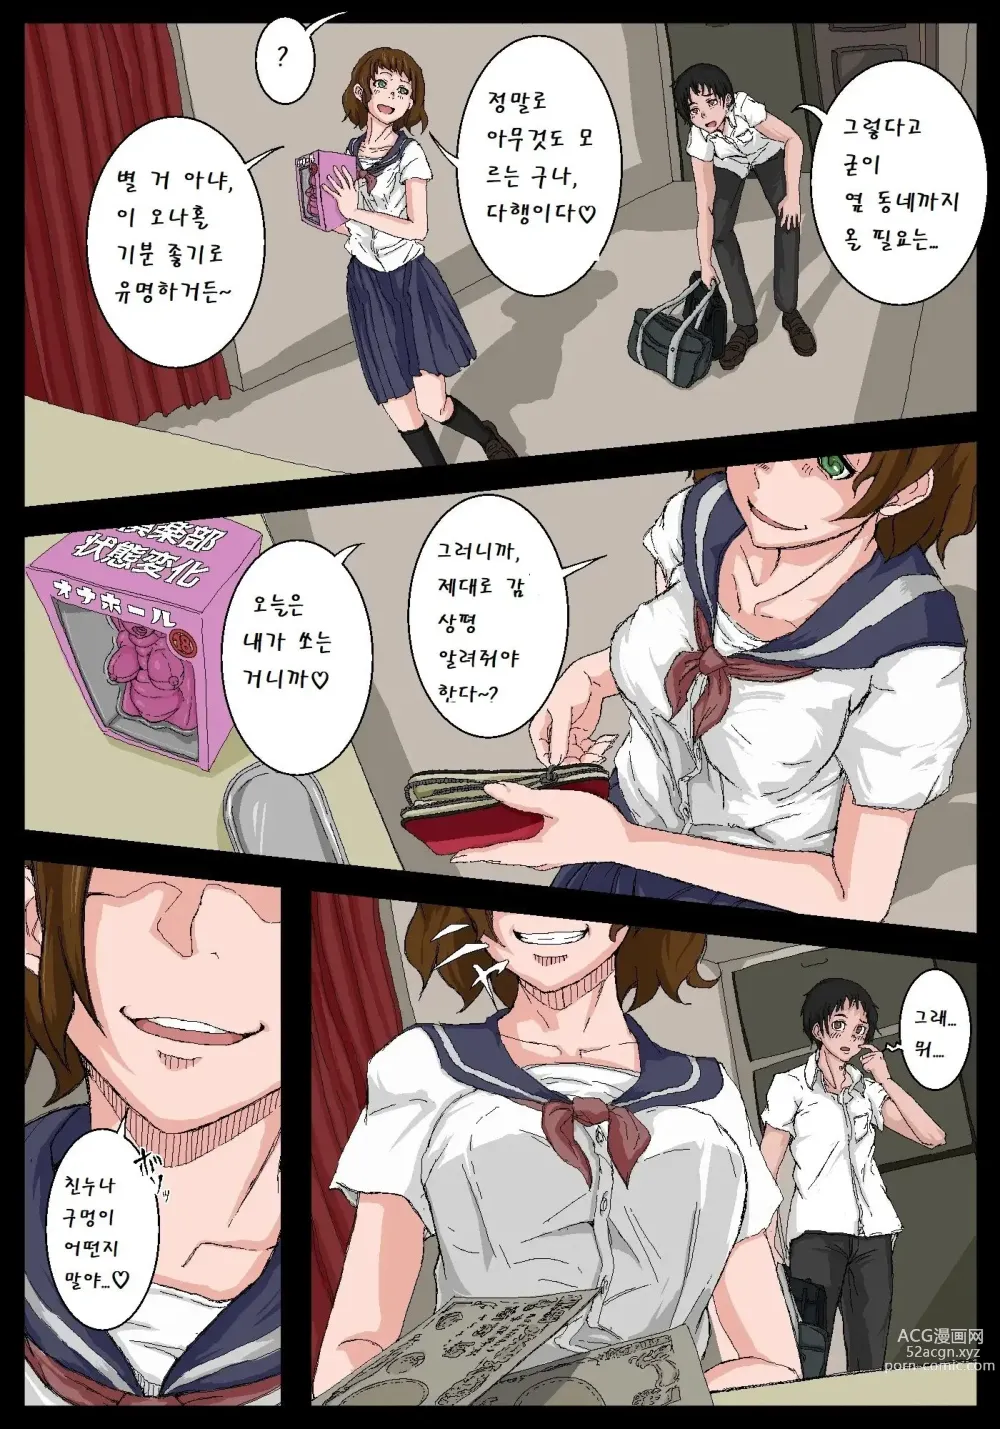 Page 24 of doujinshi 오나홀 선배